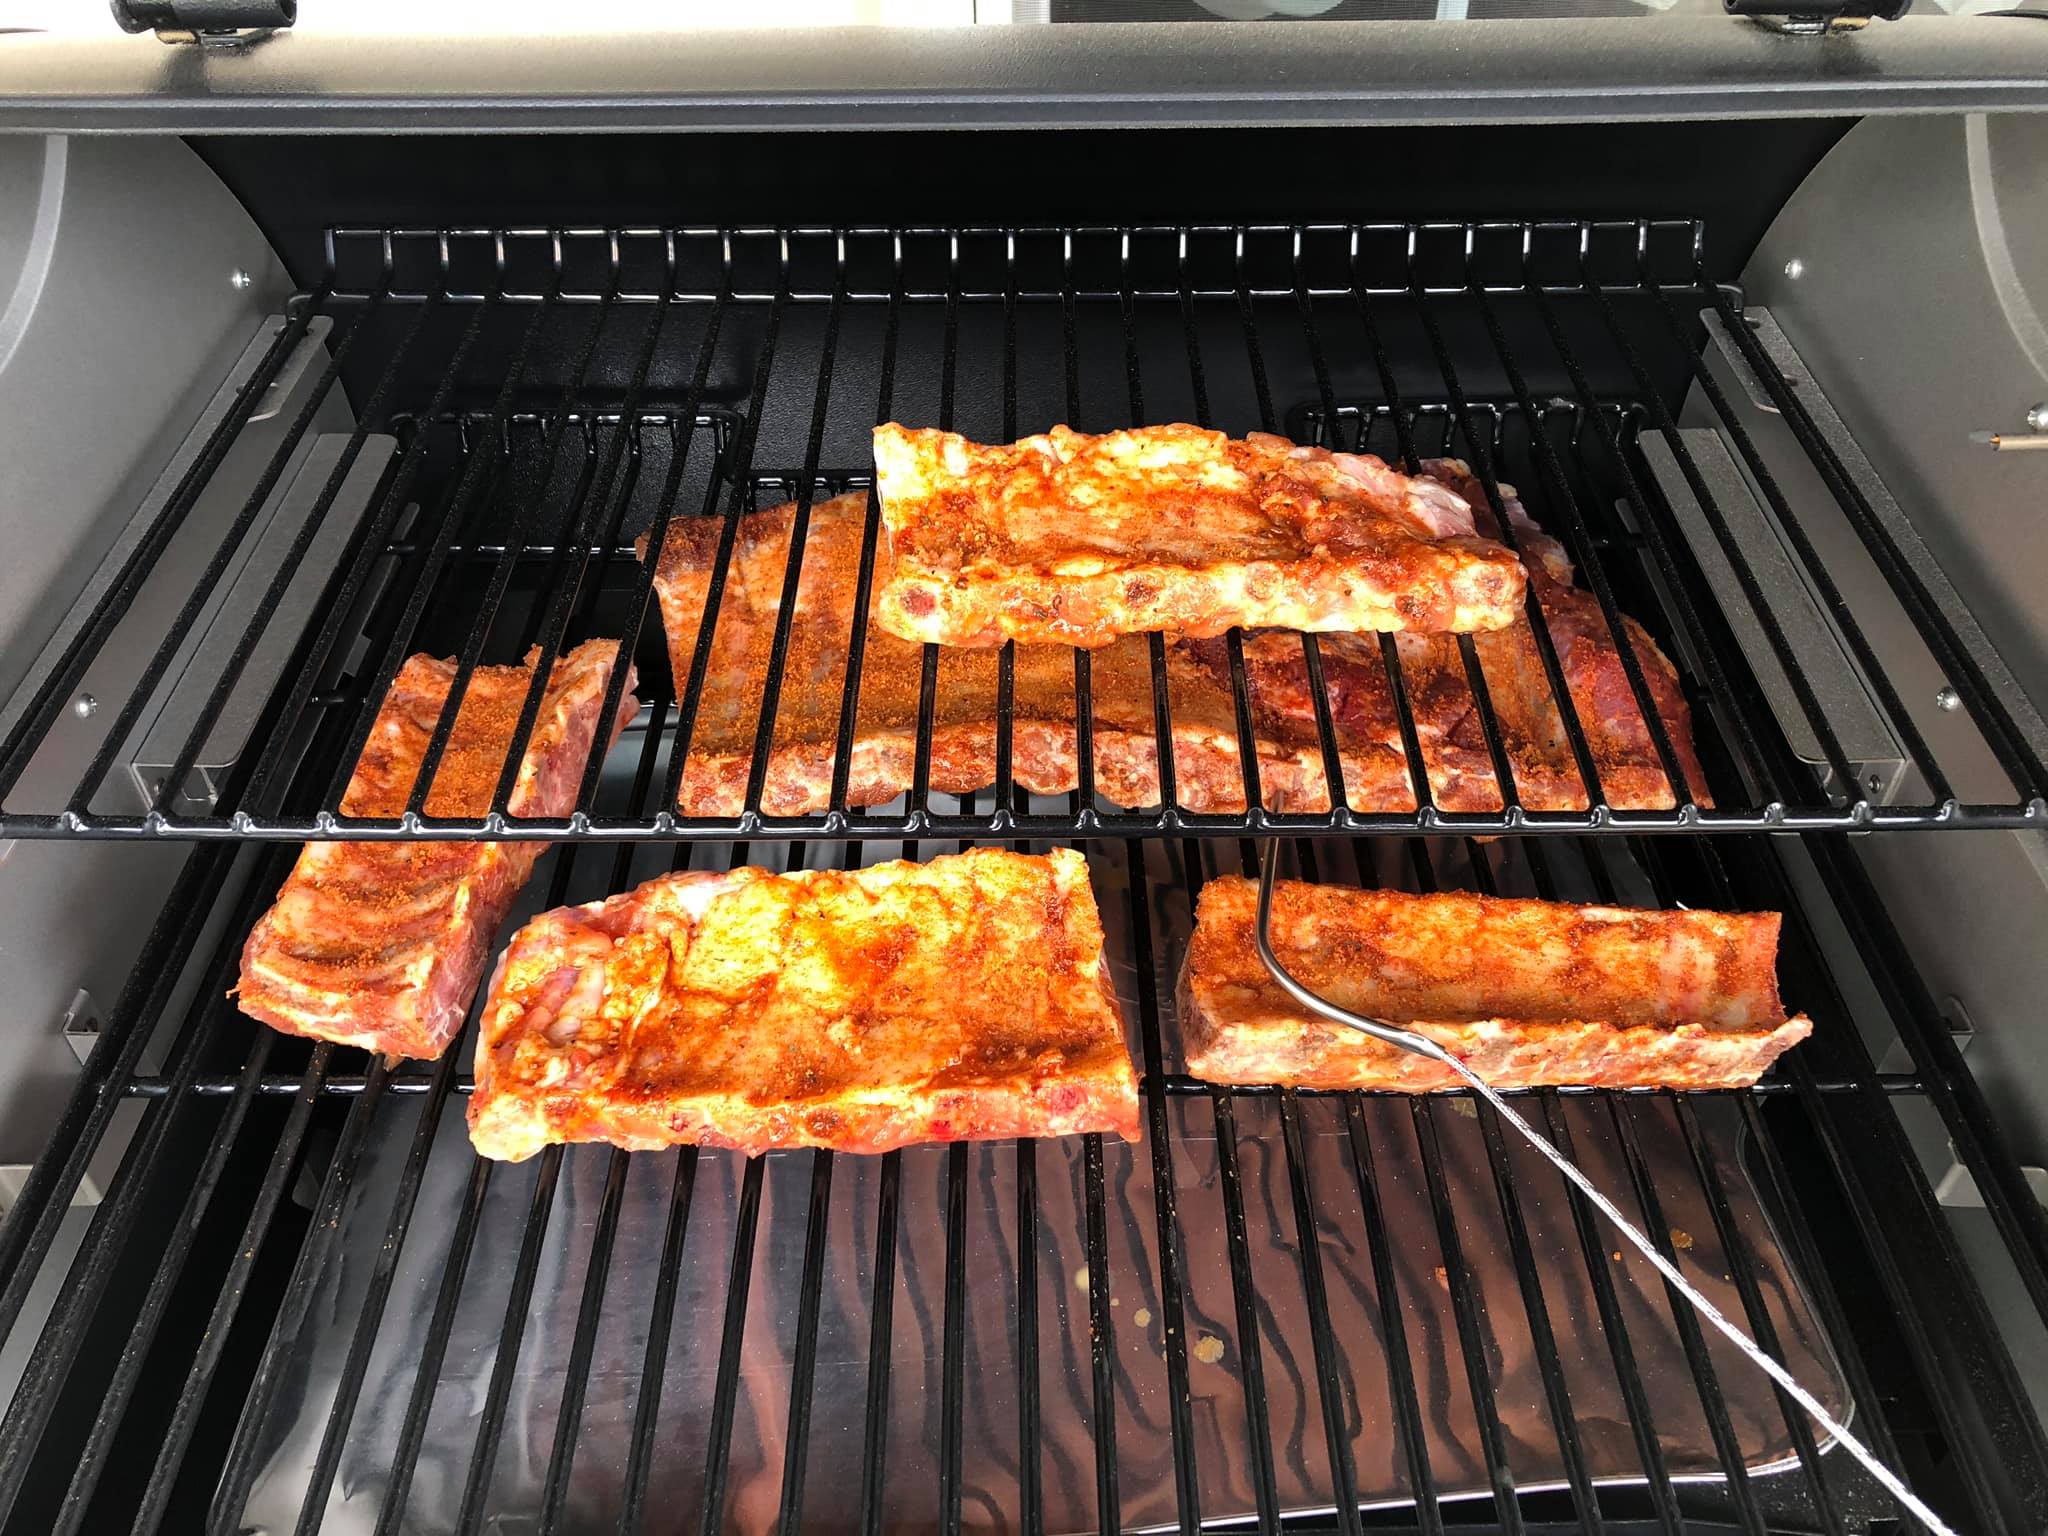 Ribs on the grill from Sugar Creek Valley Meats